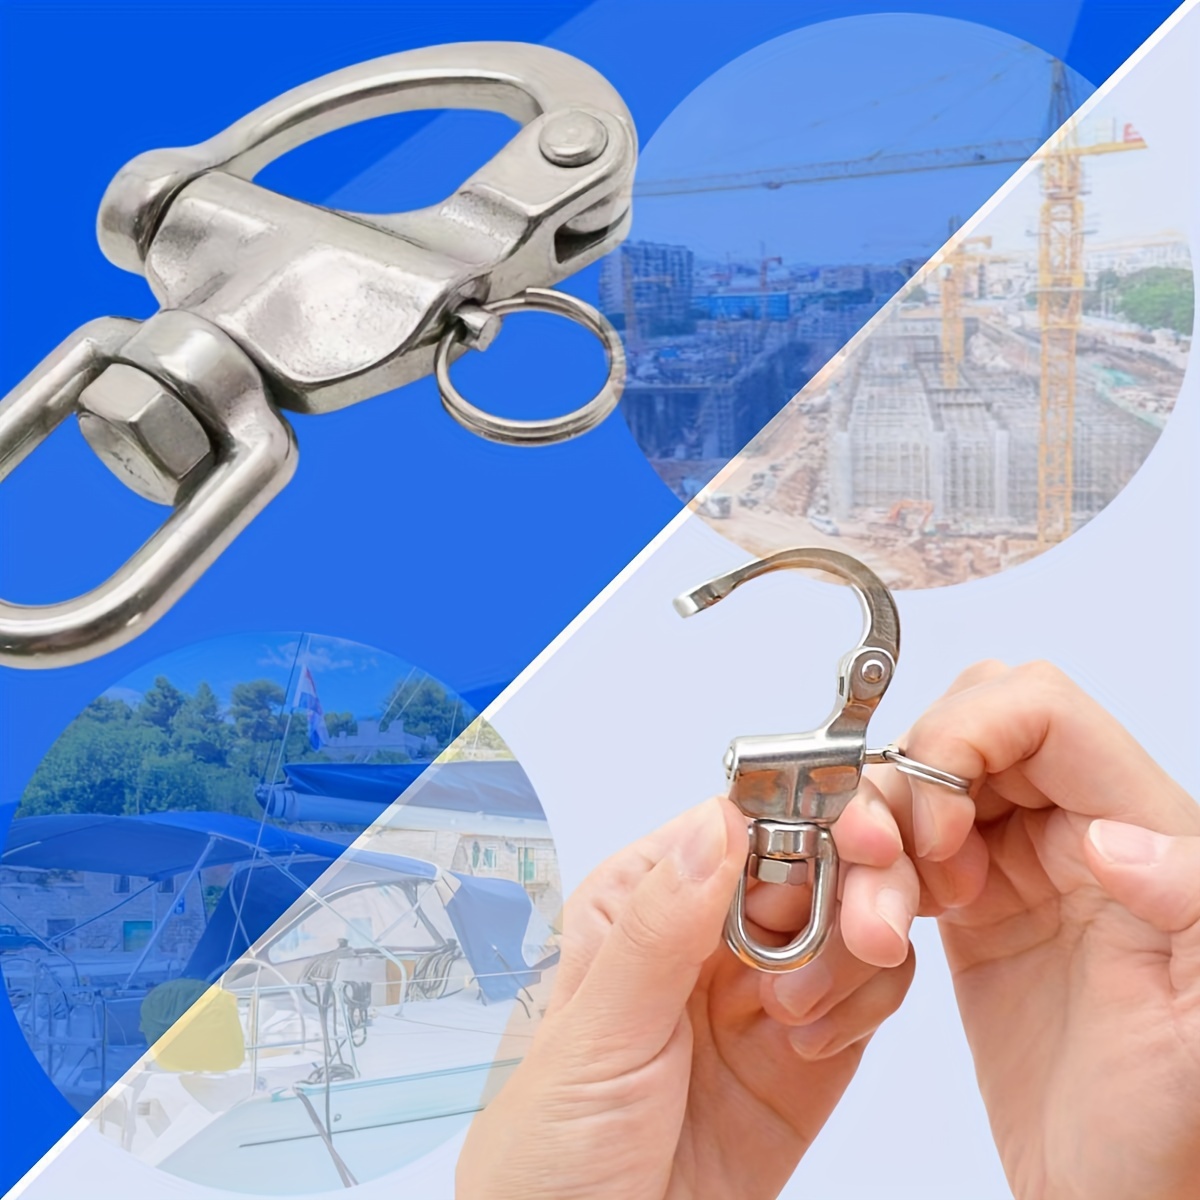 Swivel Eye Snap Shackle Of 316 Stainless Steel Quick Release - Temu Austria